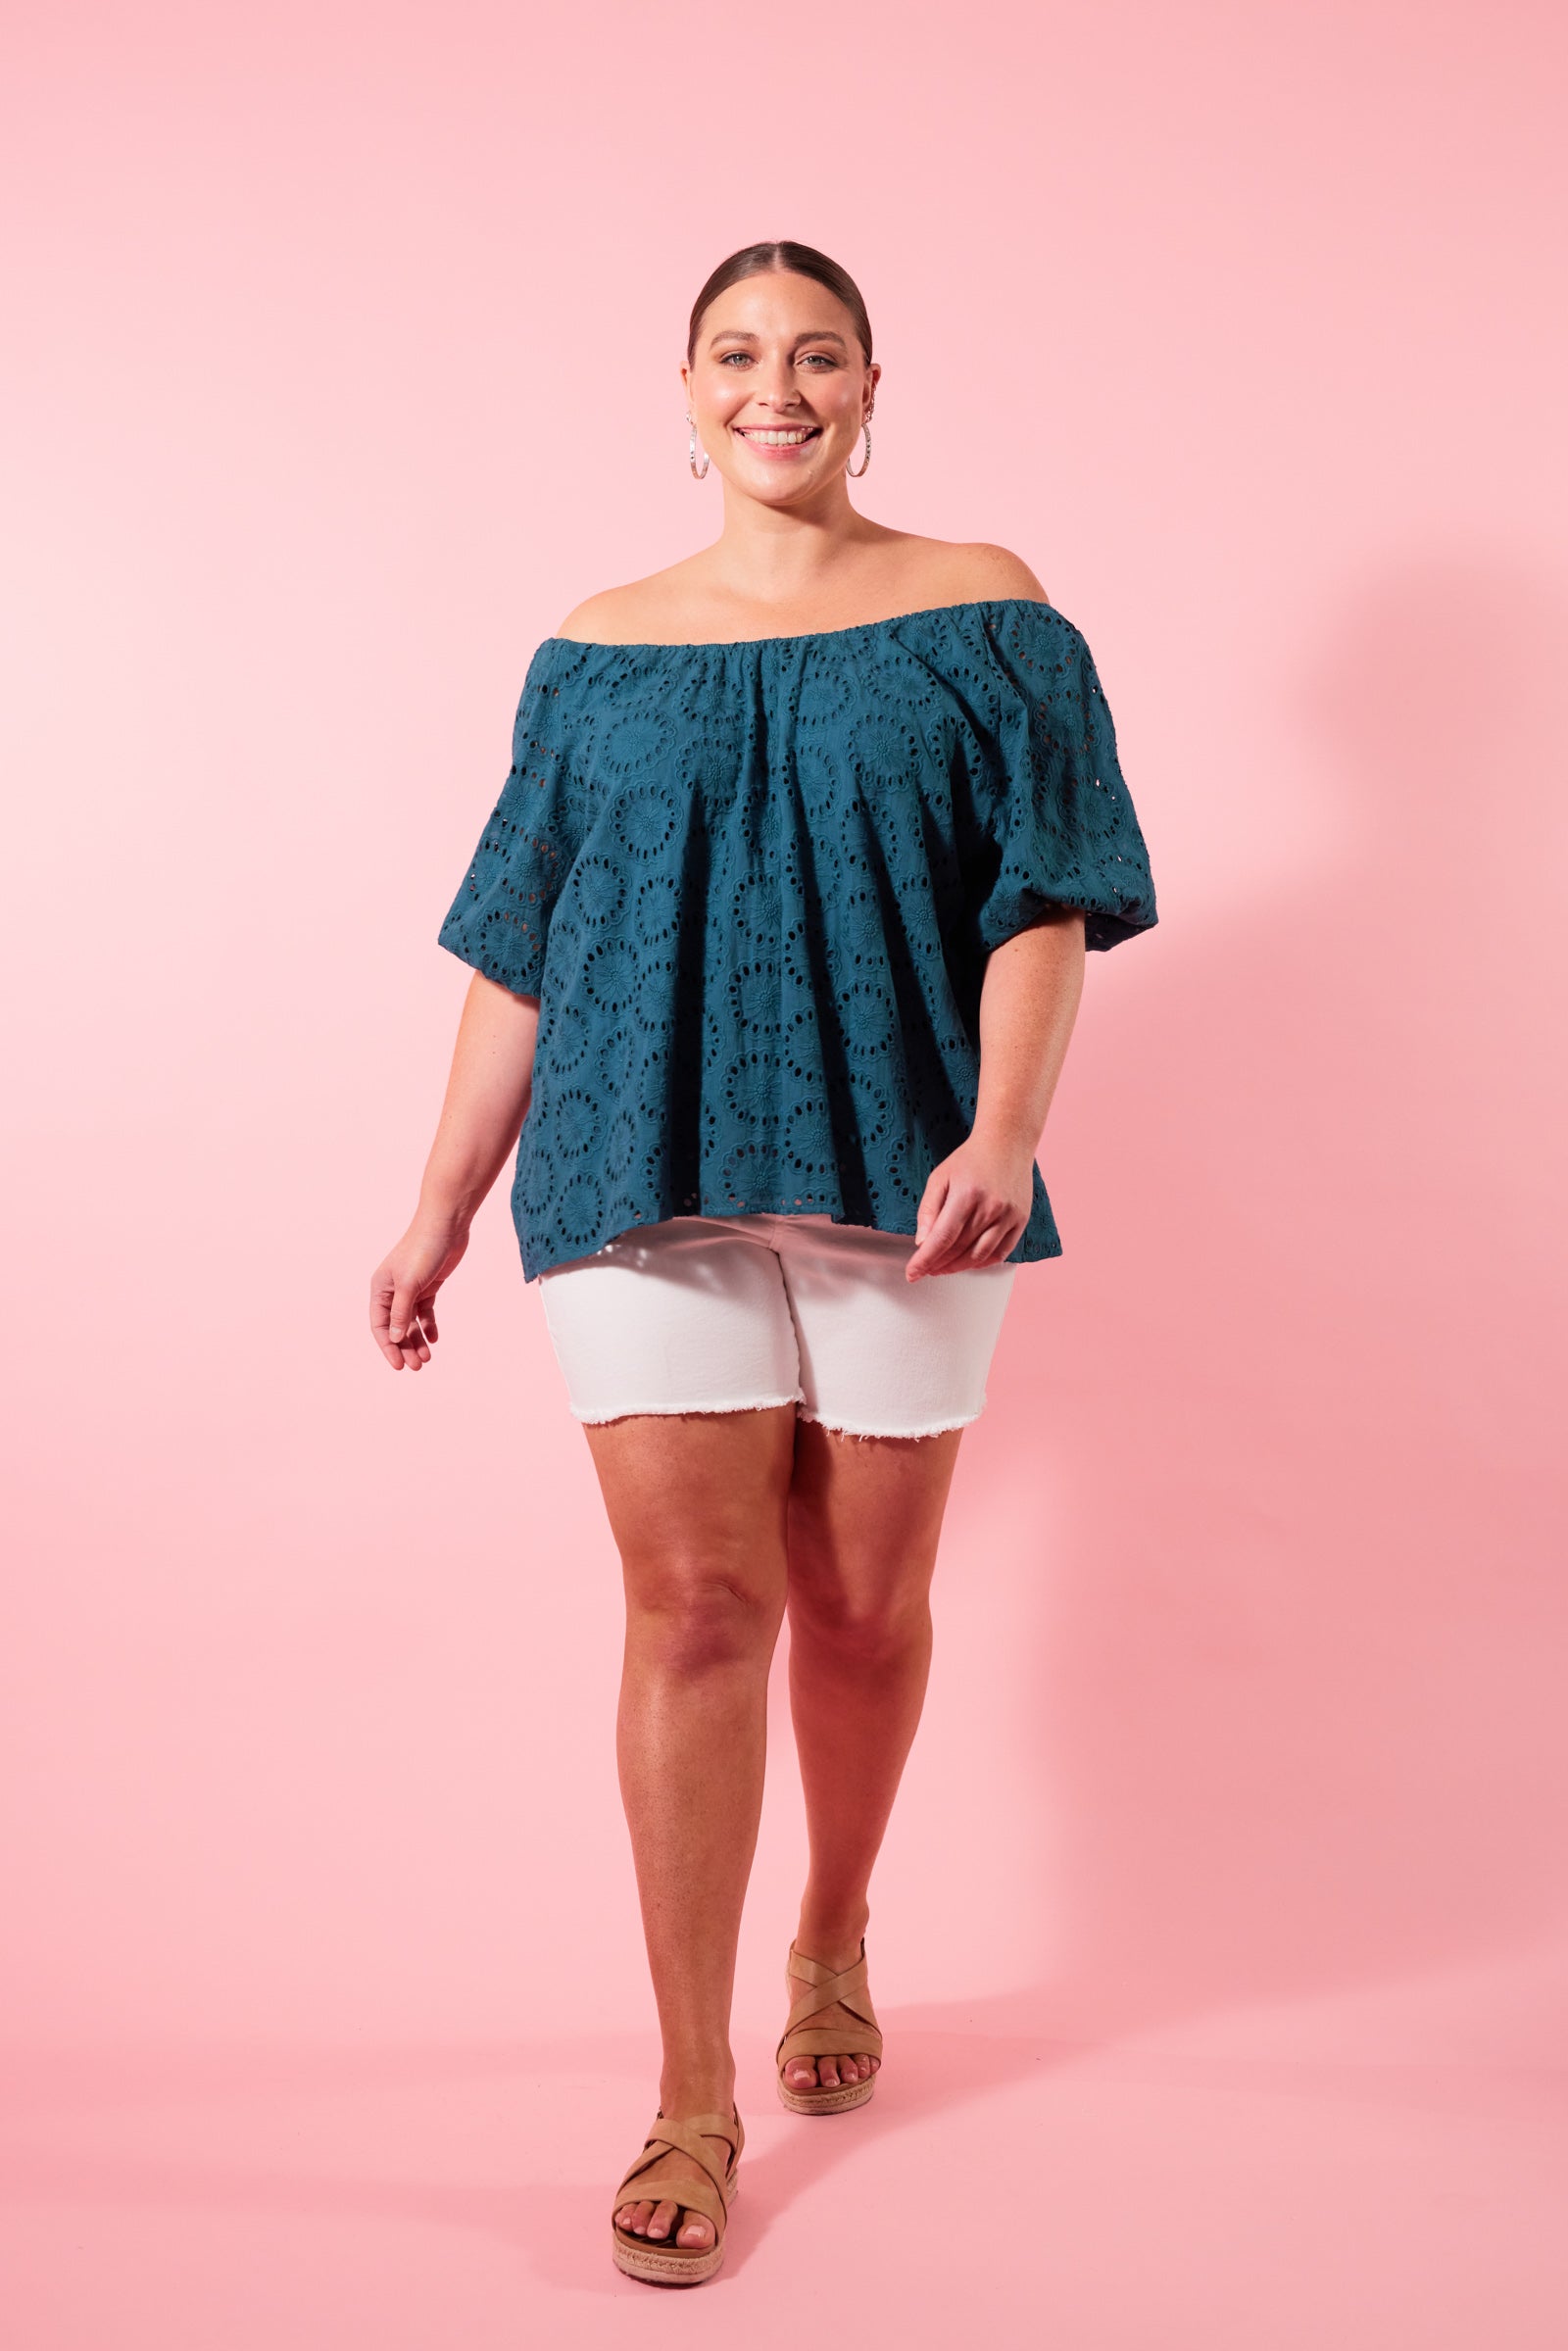 Parterre Top - Teal - Isle of Mine Clothing - Top S/S